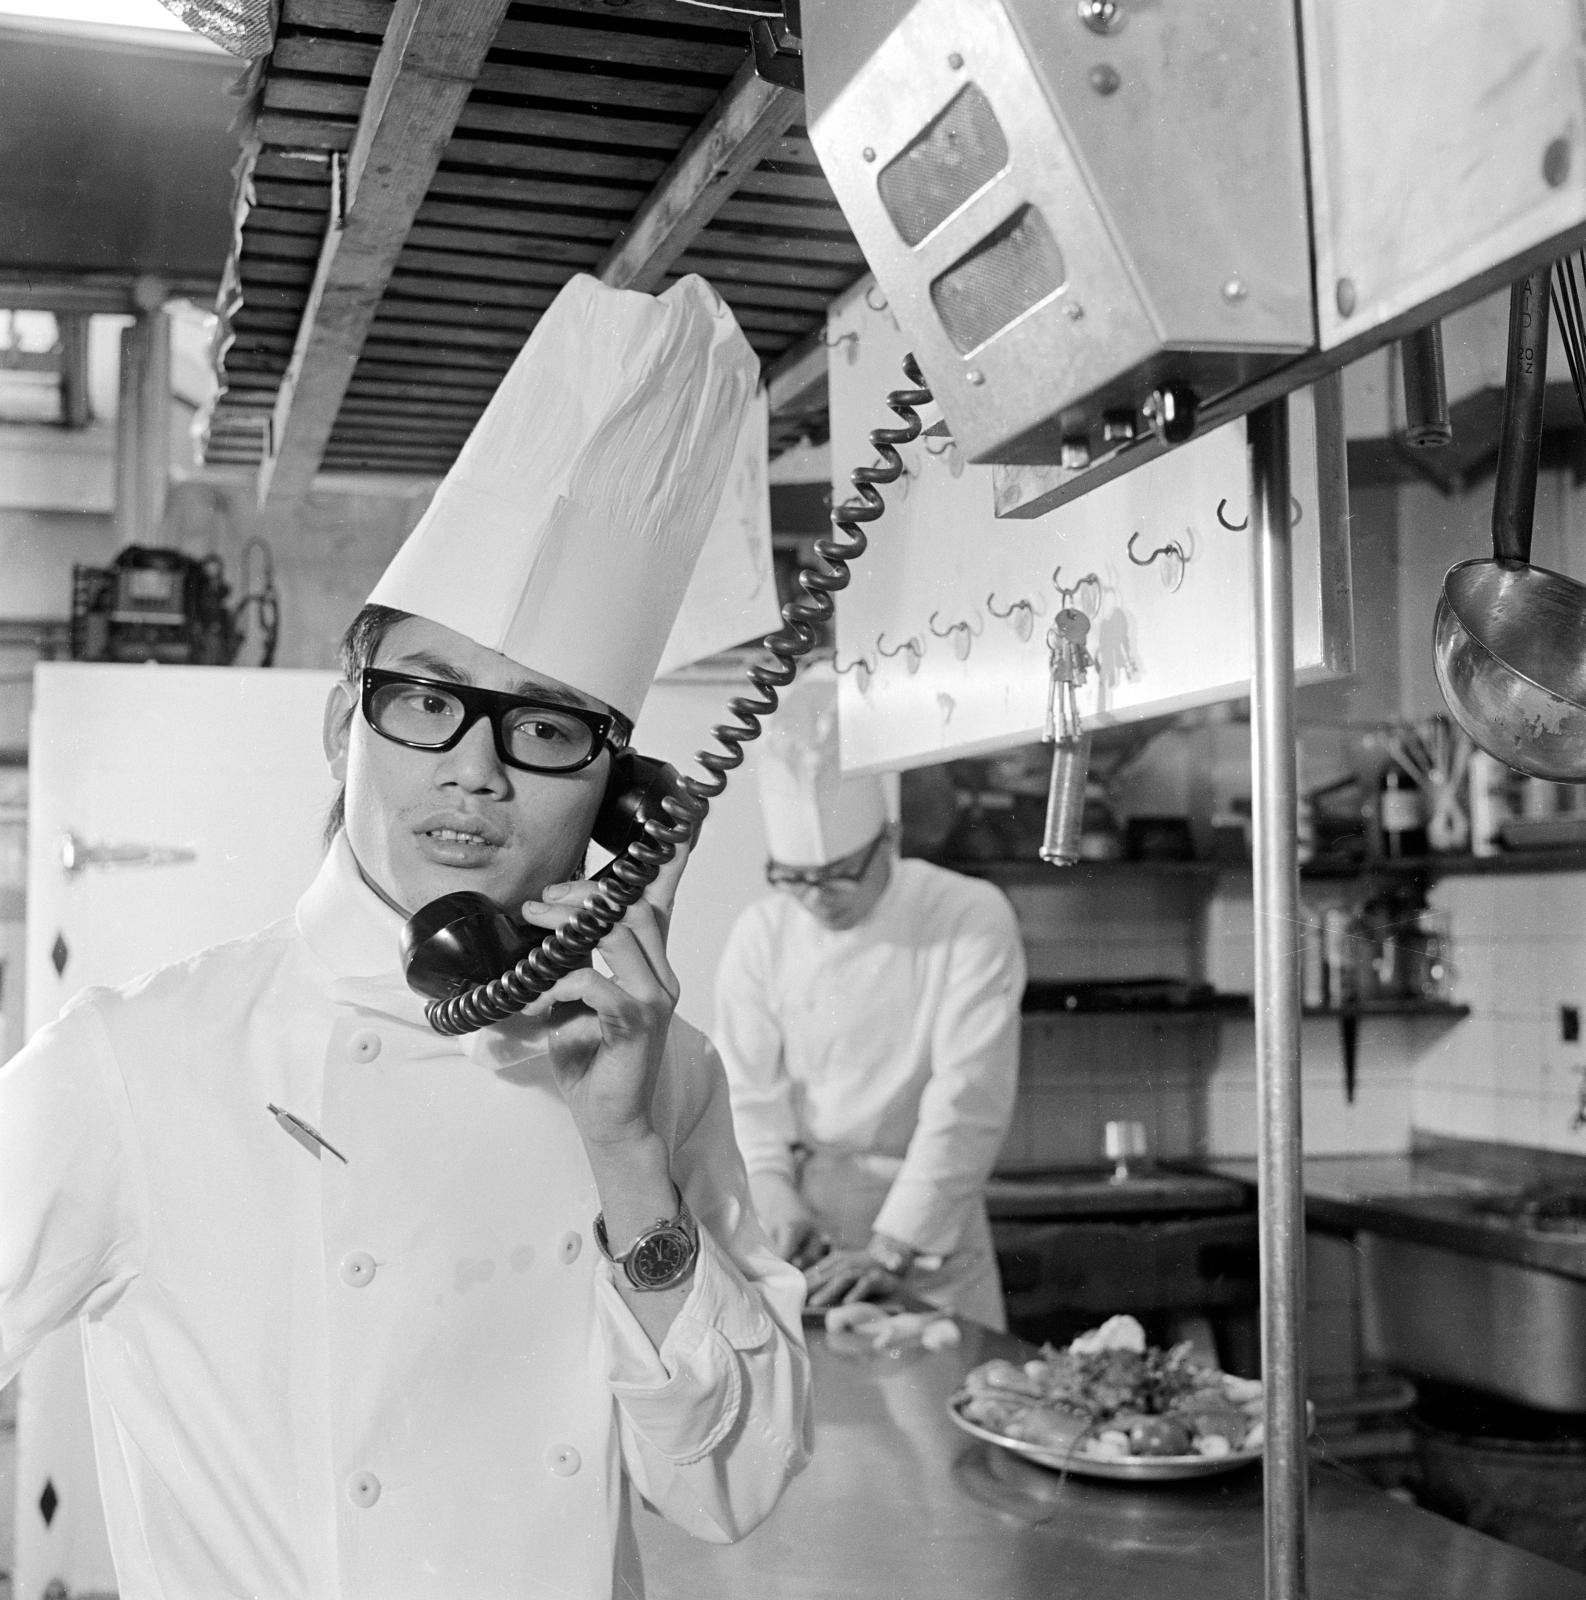 Chefs wearing whites at work in the kitchen at Wheelers Sovereign Restaurant. The chef in the foreground is talking on a telephone. Black and white photo taken 1960-1980.